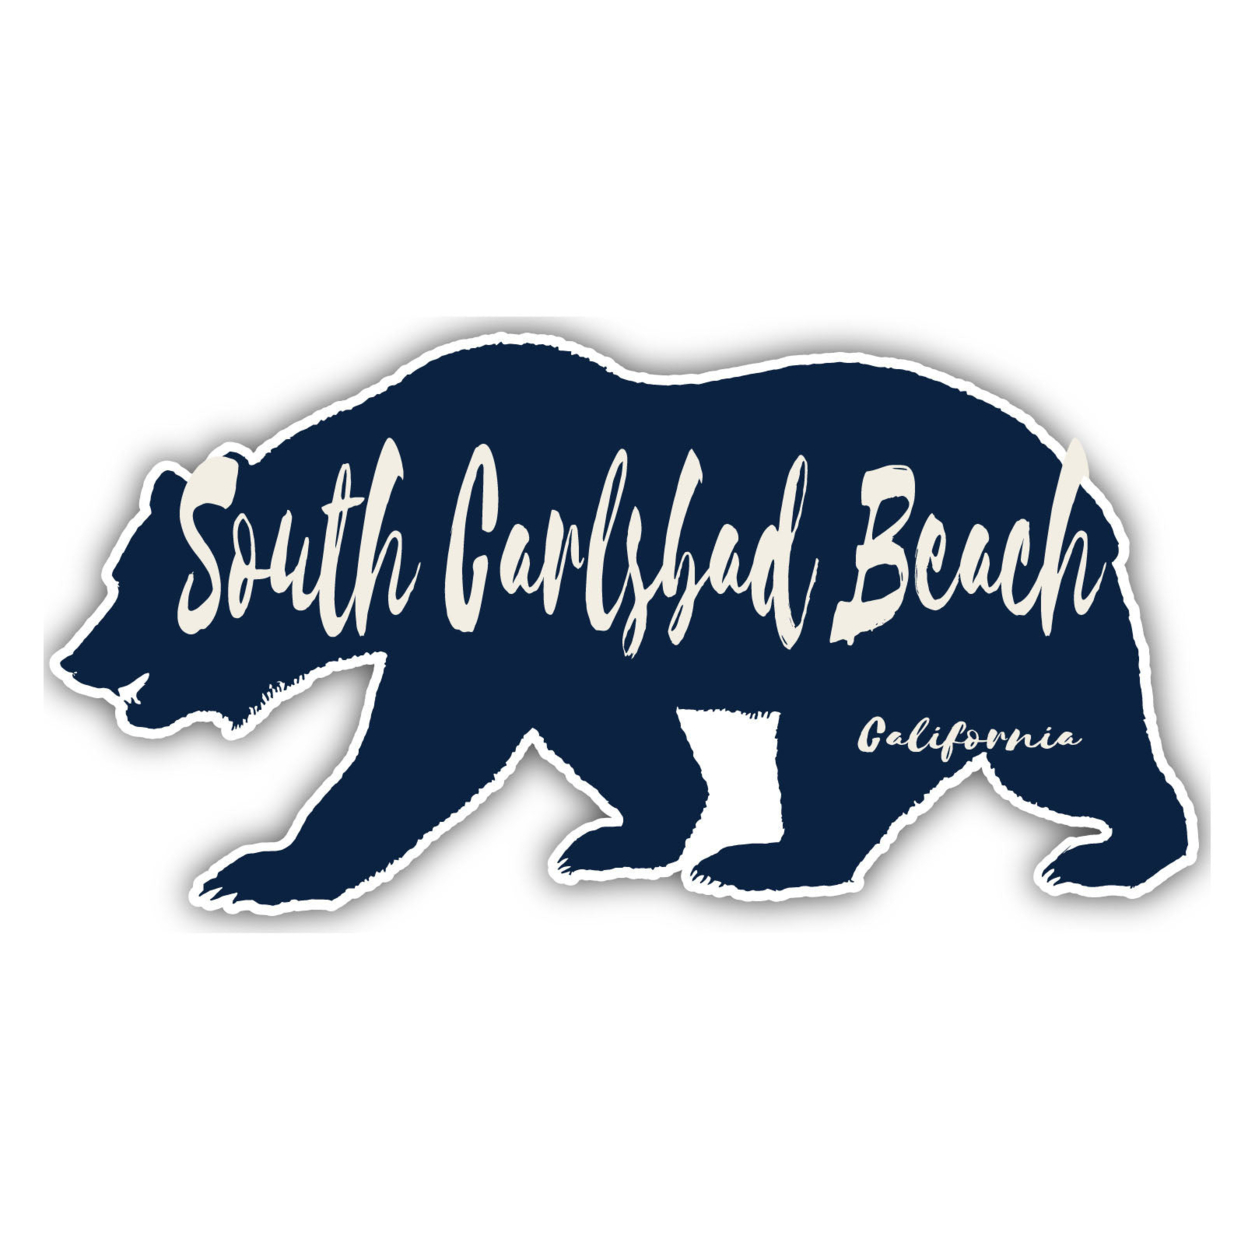 South Carlsbad Beach California Souvenir Decorative Stickers (Choose Theme And Size) - Single Unit, 2-Inch, Tent